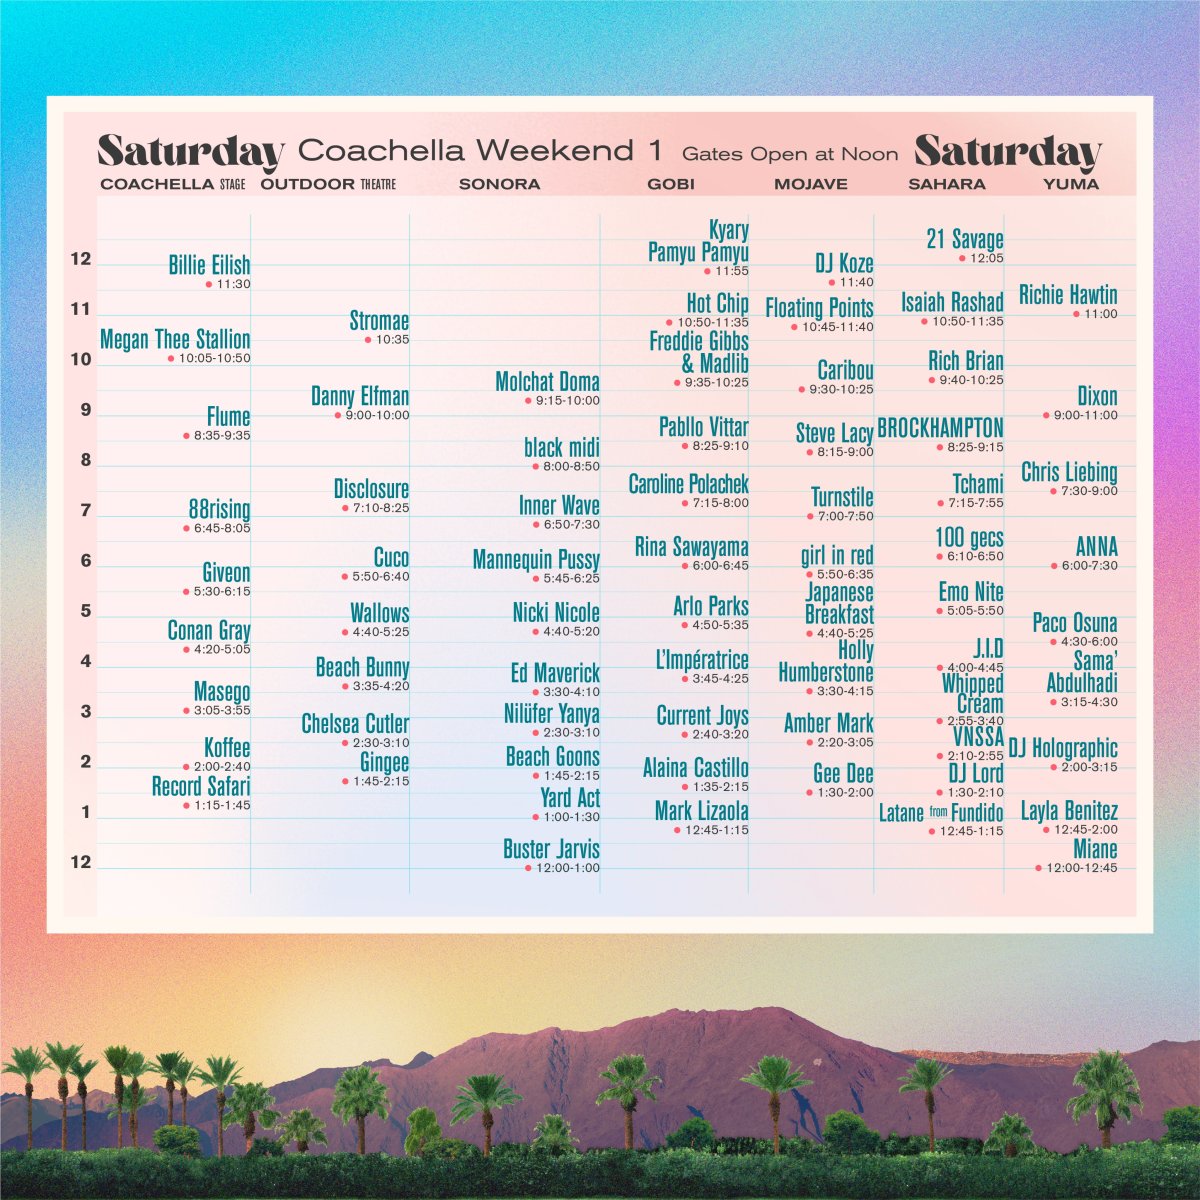 Coachella Weekend 1 set times for Saturday, April 16th.